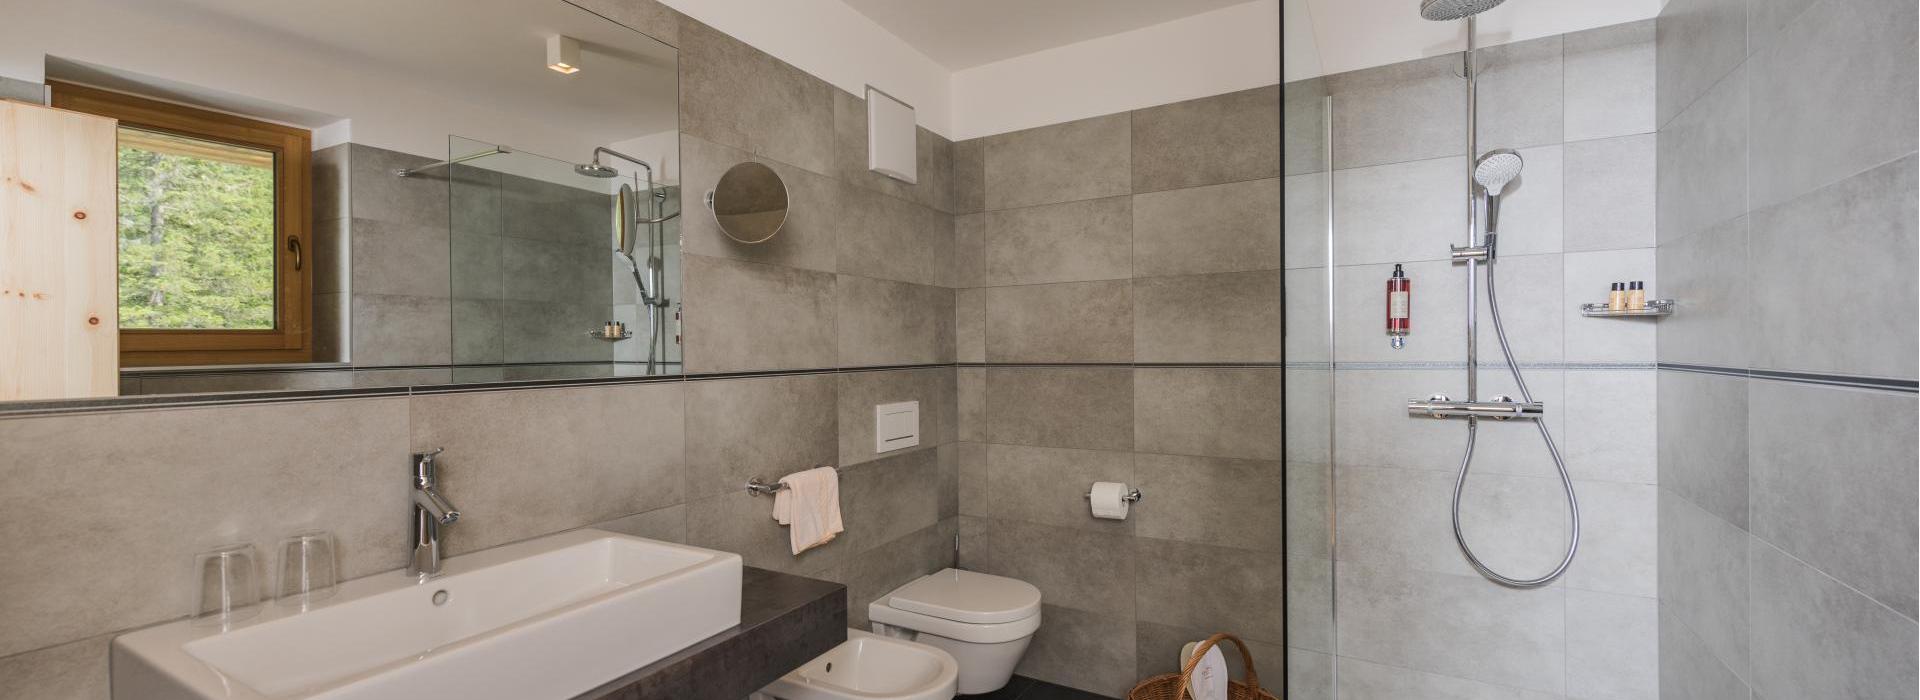 Bathroom of the double room Comfort with shower, washbasin, bidet and WC